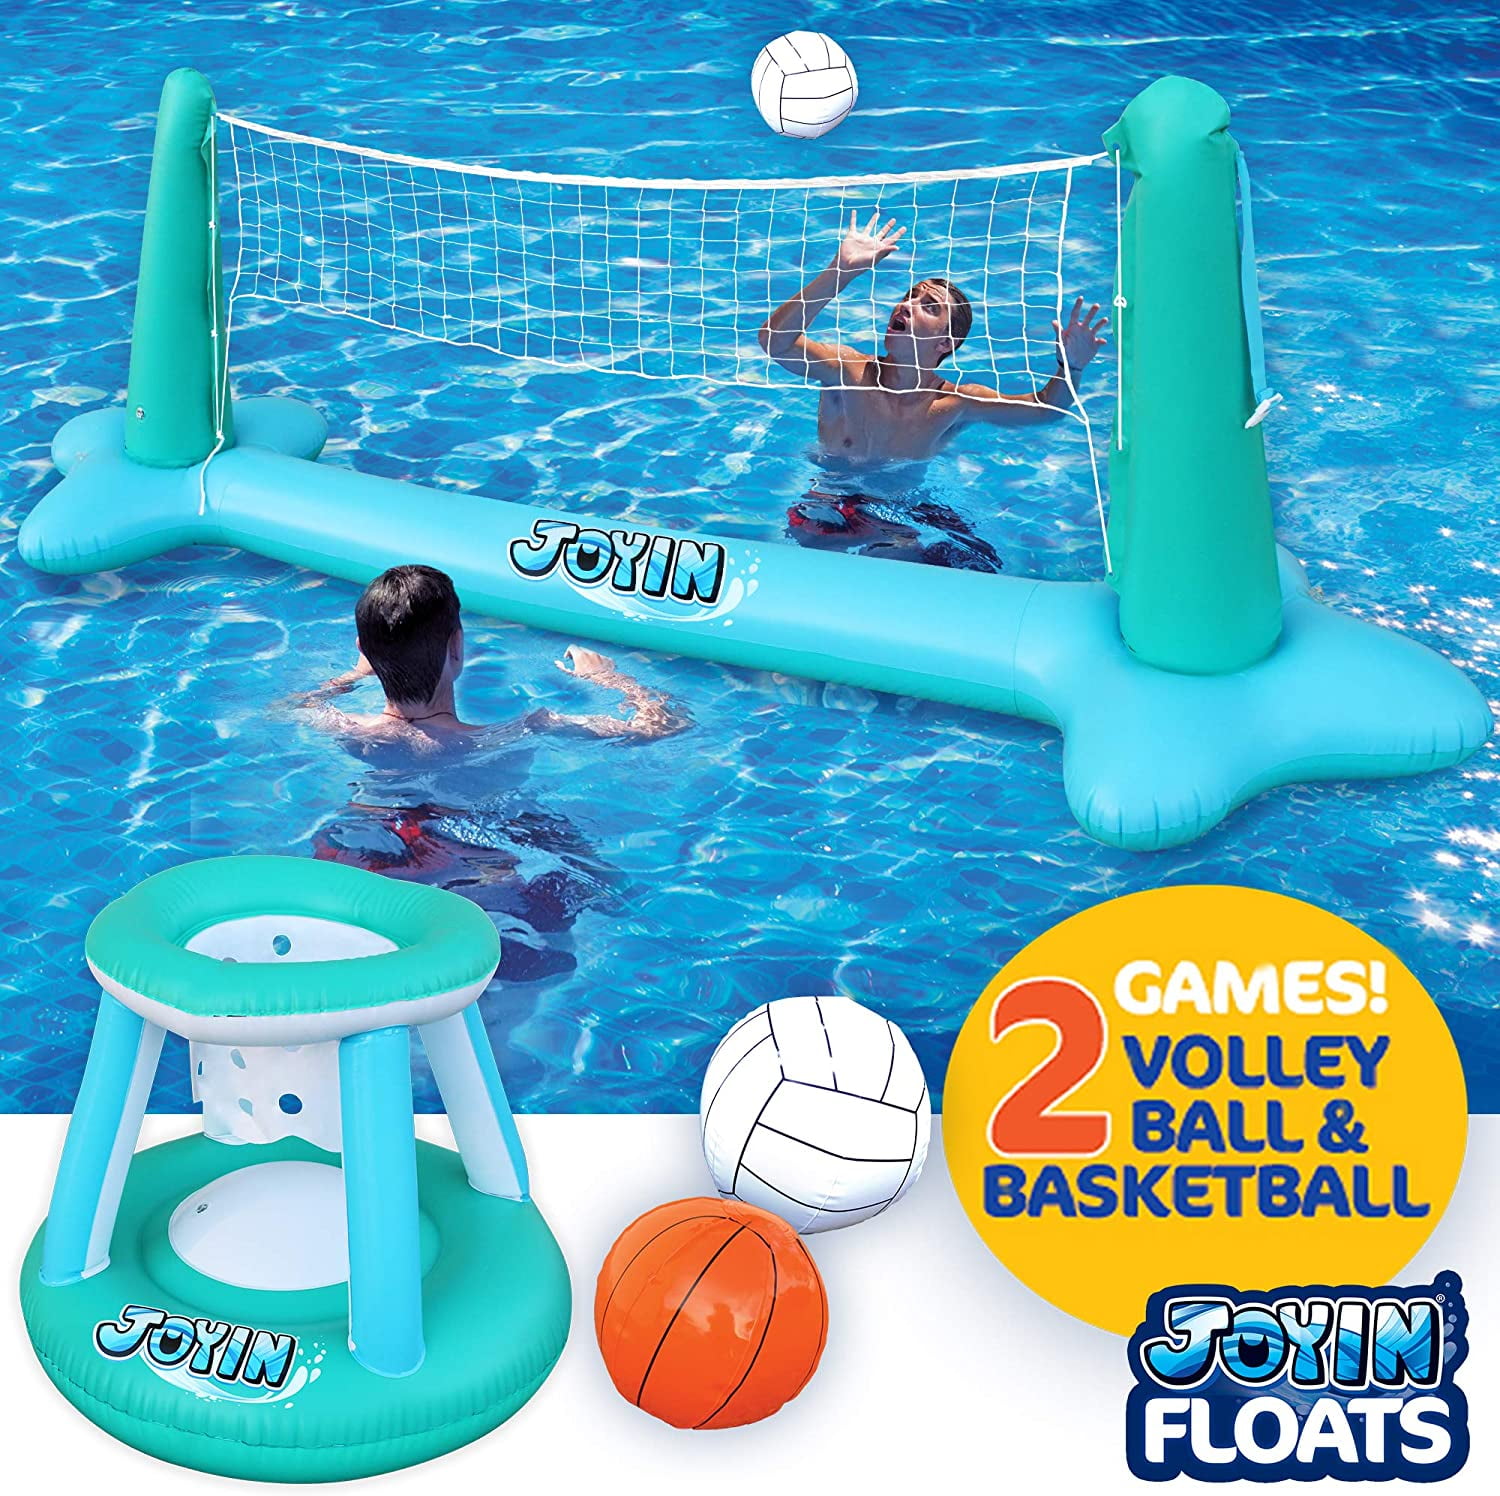 Volleyball Court Inflatable Pool Float Set Volleyball Net & Basketball Hoops; Includes Bonus Air Pumper Balls Included for Kids and Adults Swimming Game Toy Floating 105”x28”x35” Summer Floaties 